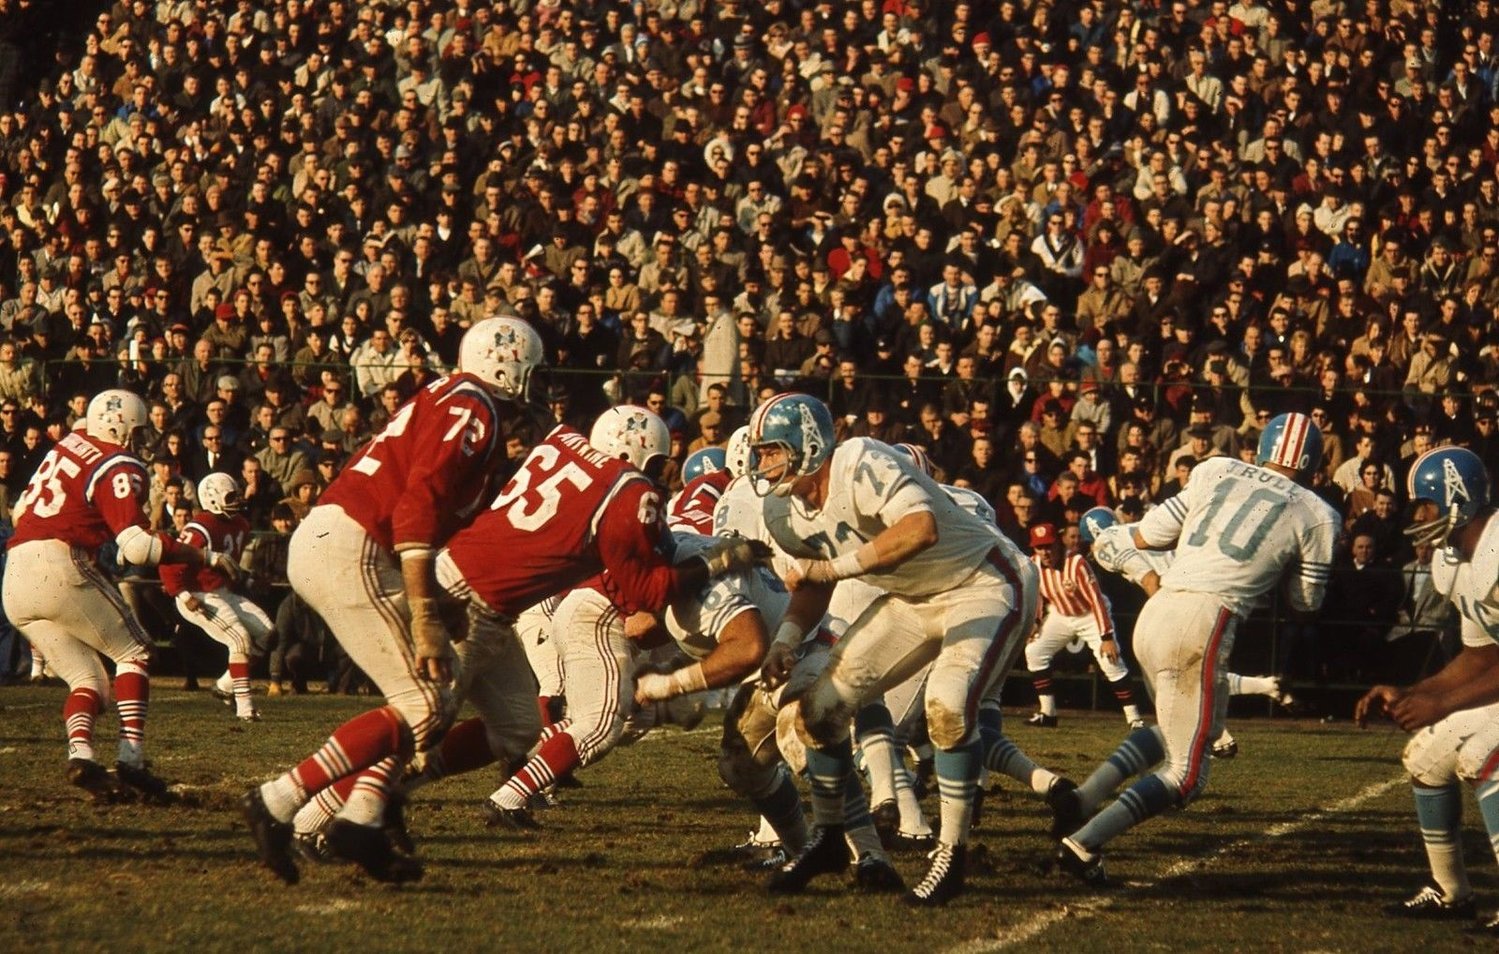 The Boston Patriots taking on the Houston Oilers at Fenway Park in 1963. The Patriots were homeless for 10 years before moving to Foxboro in 1971.